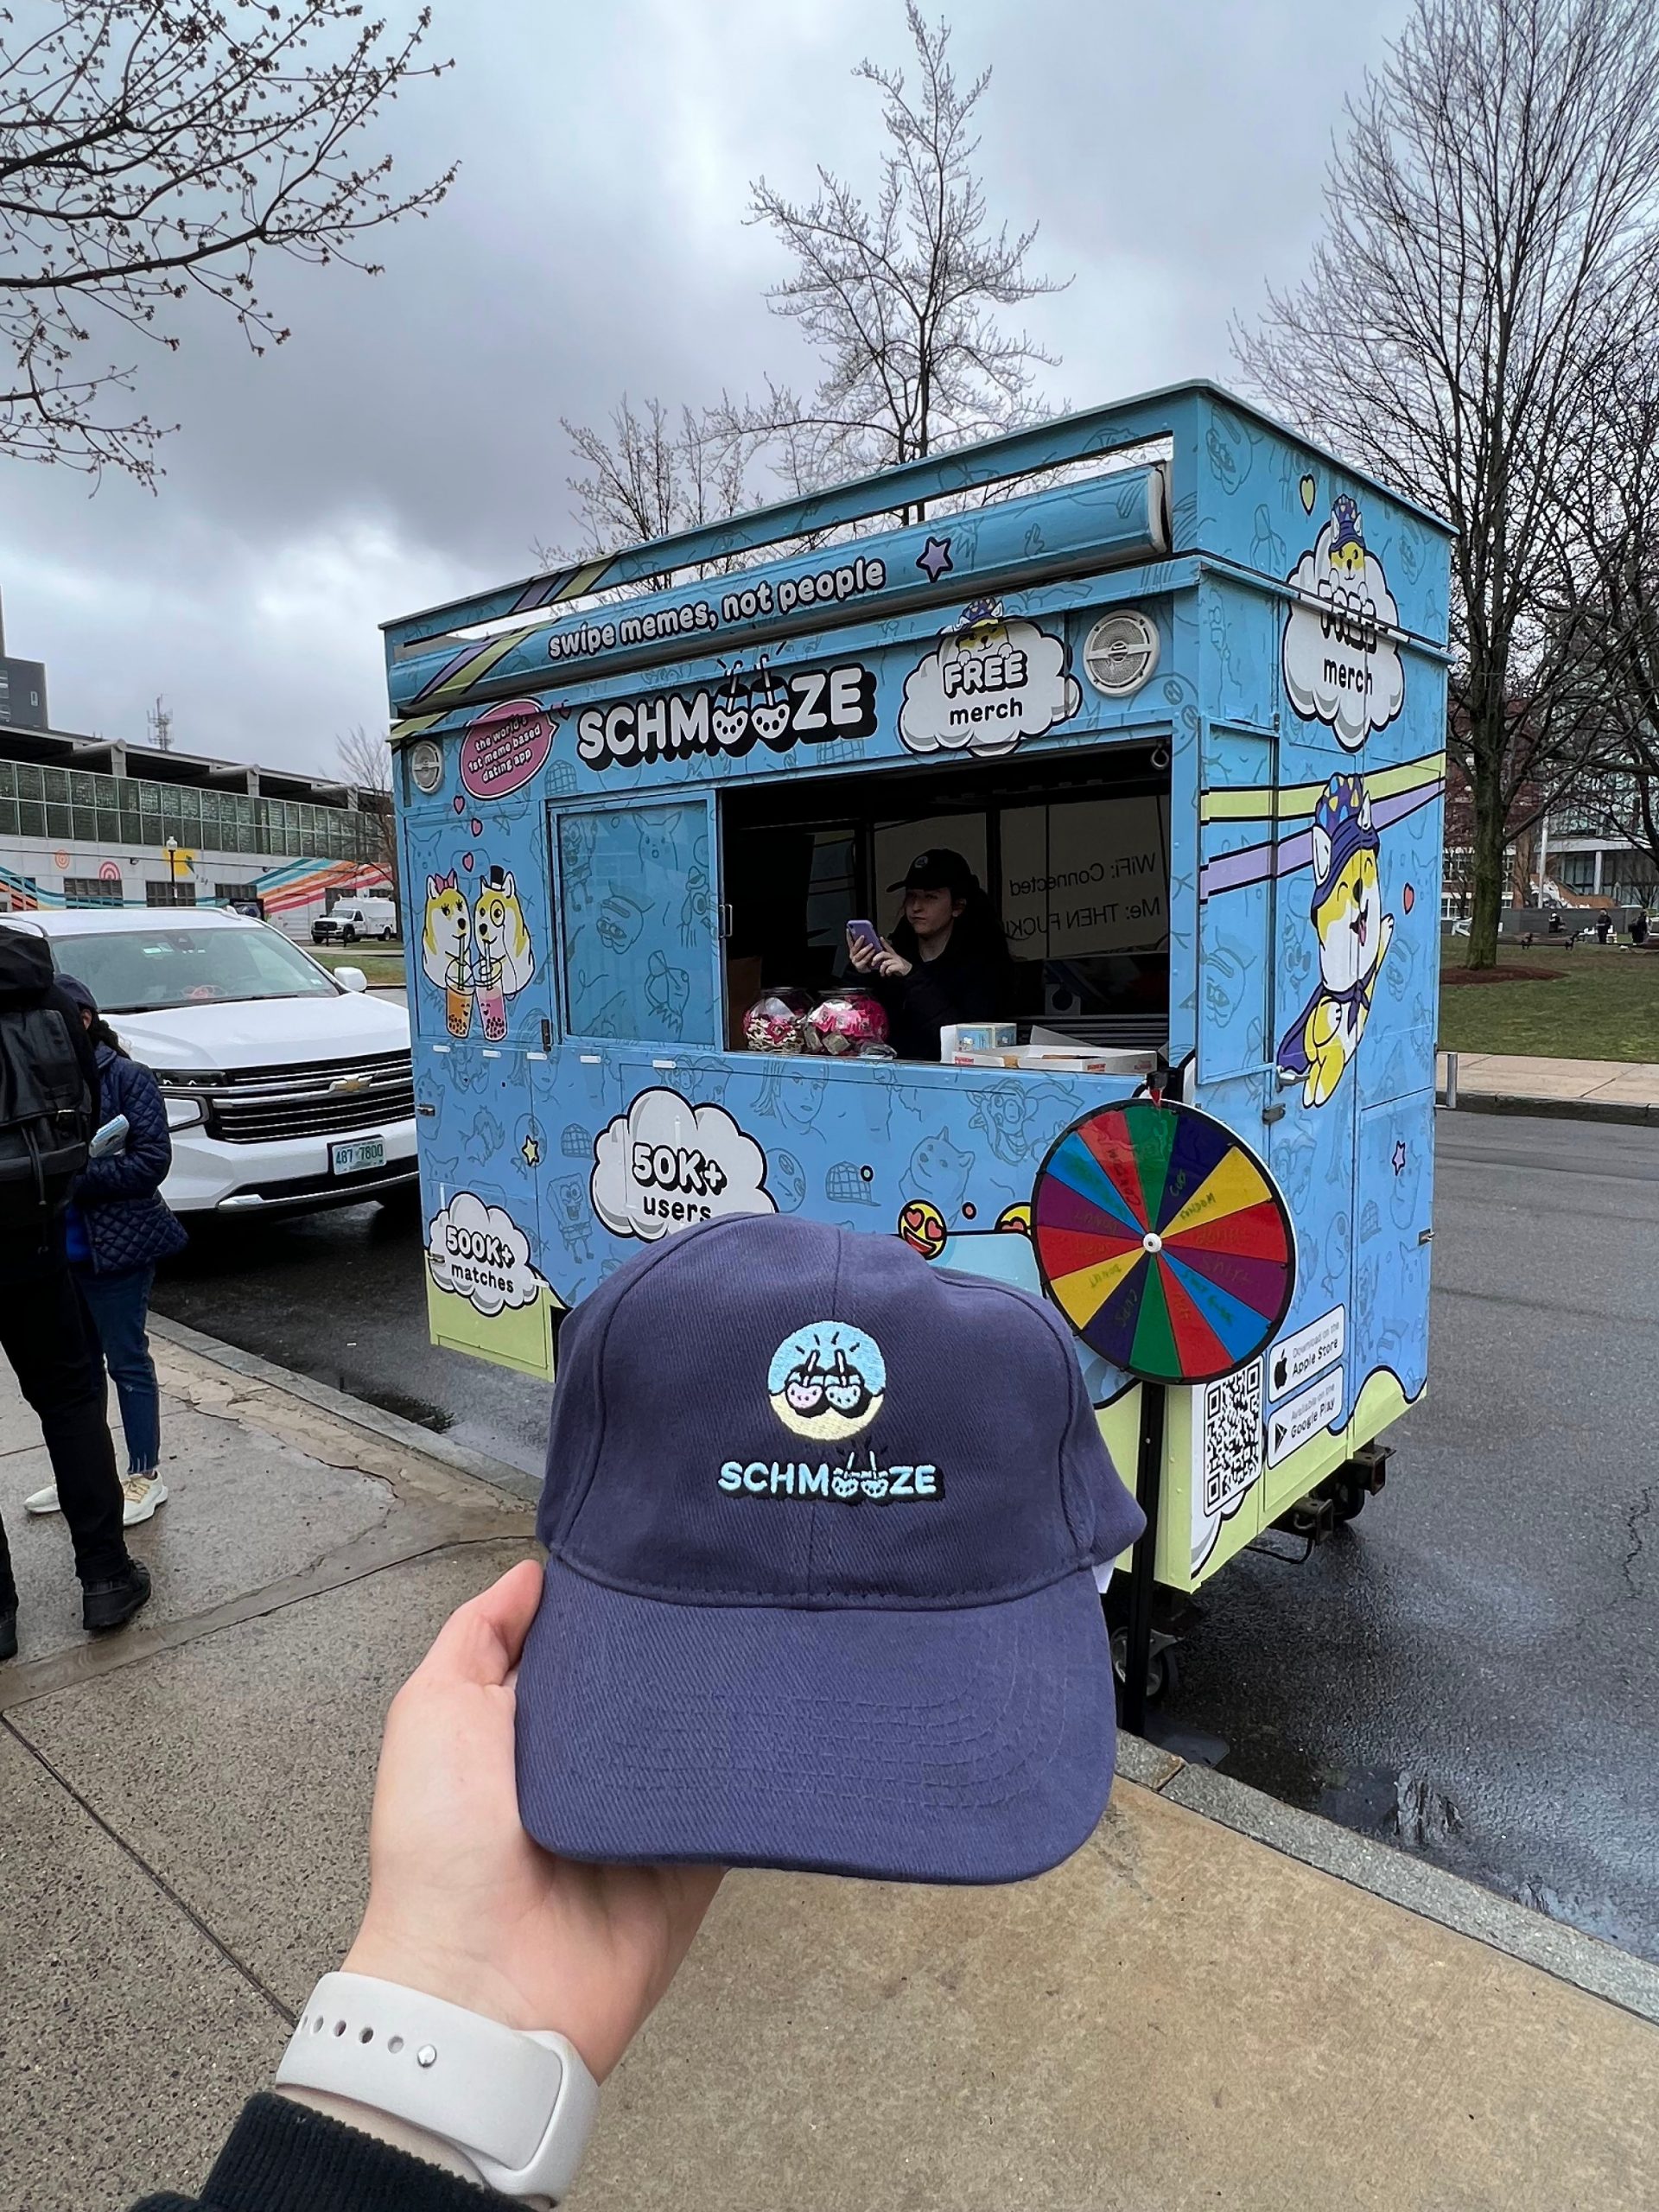 Schmooze branded cart and hat